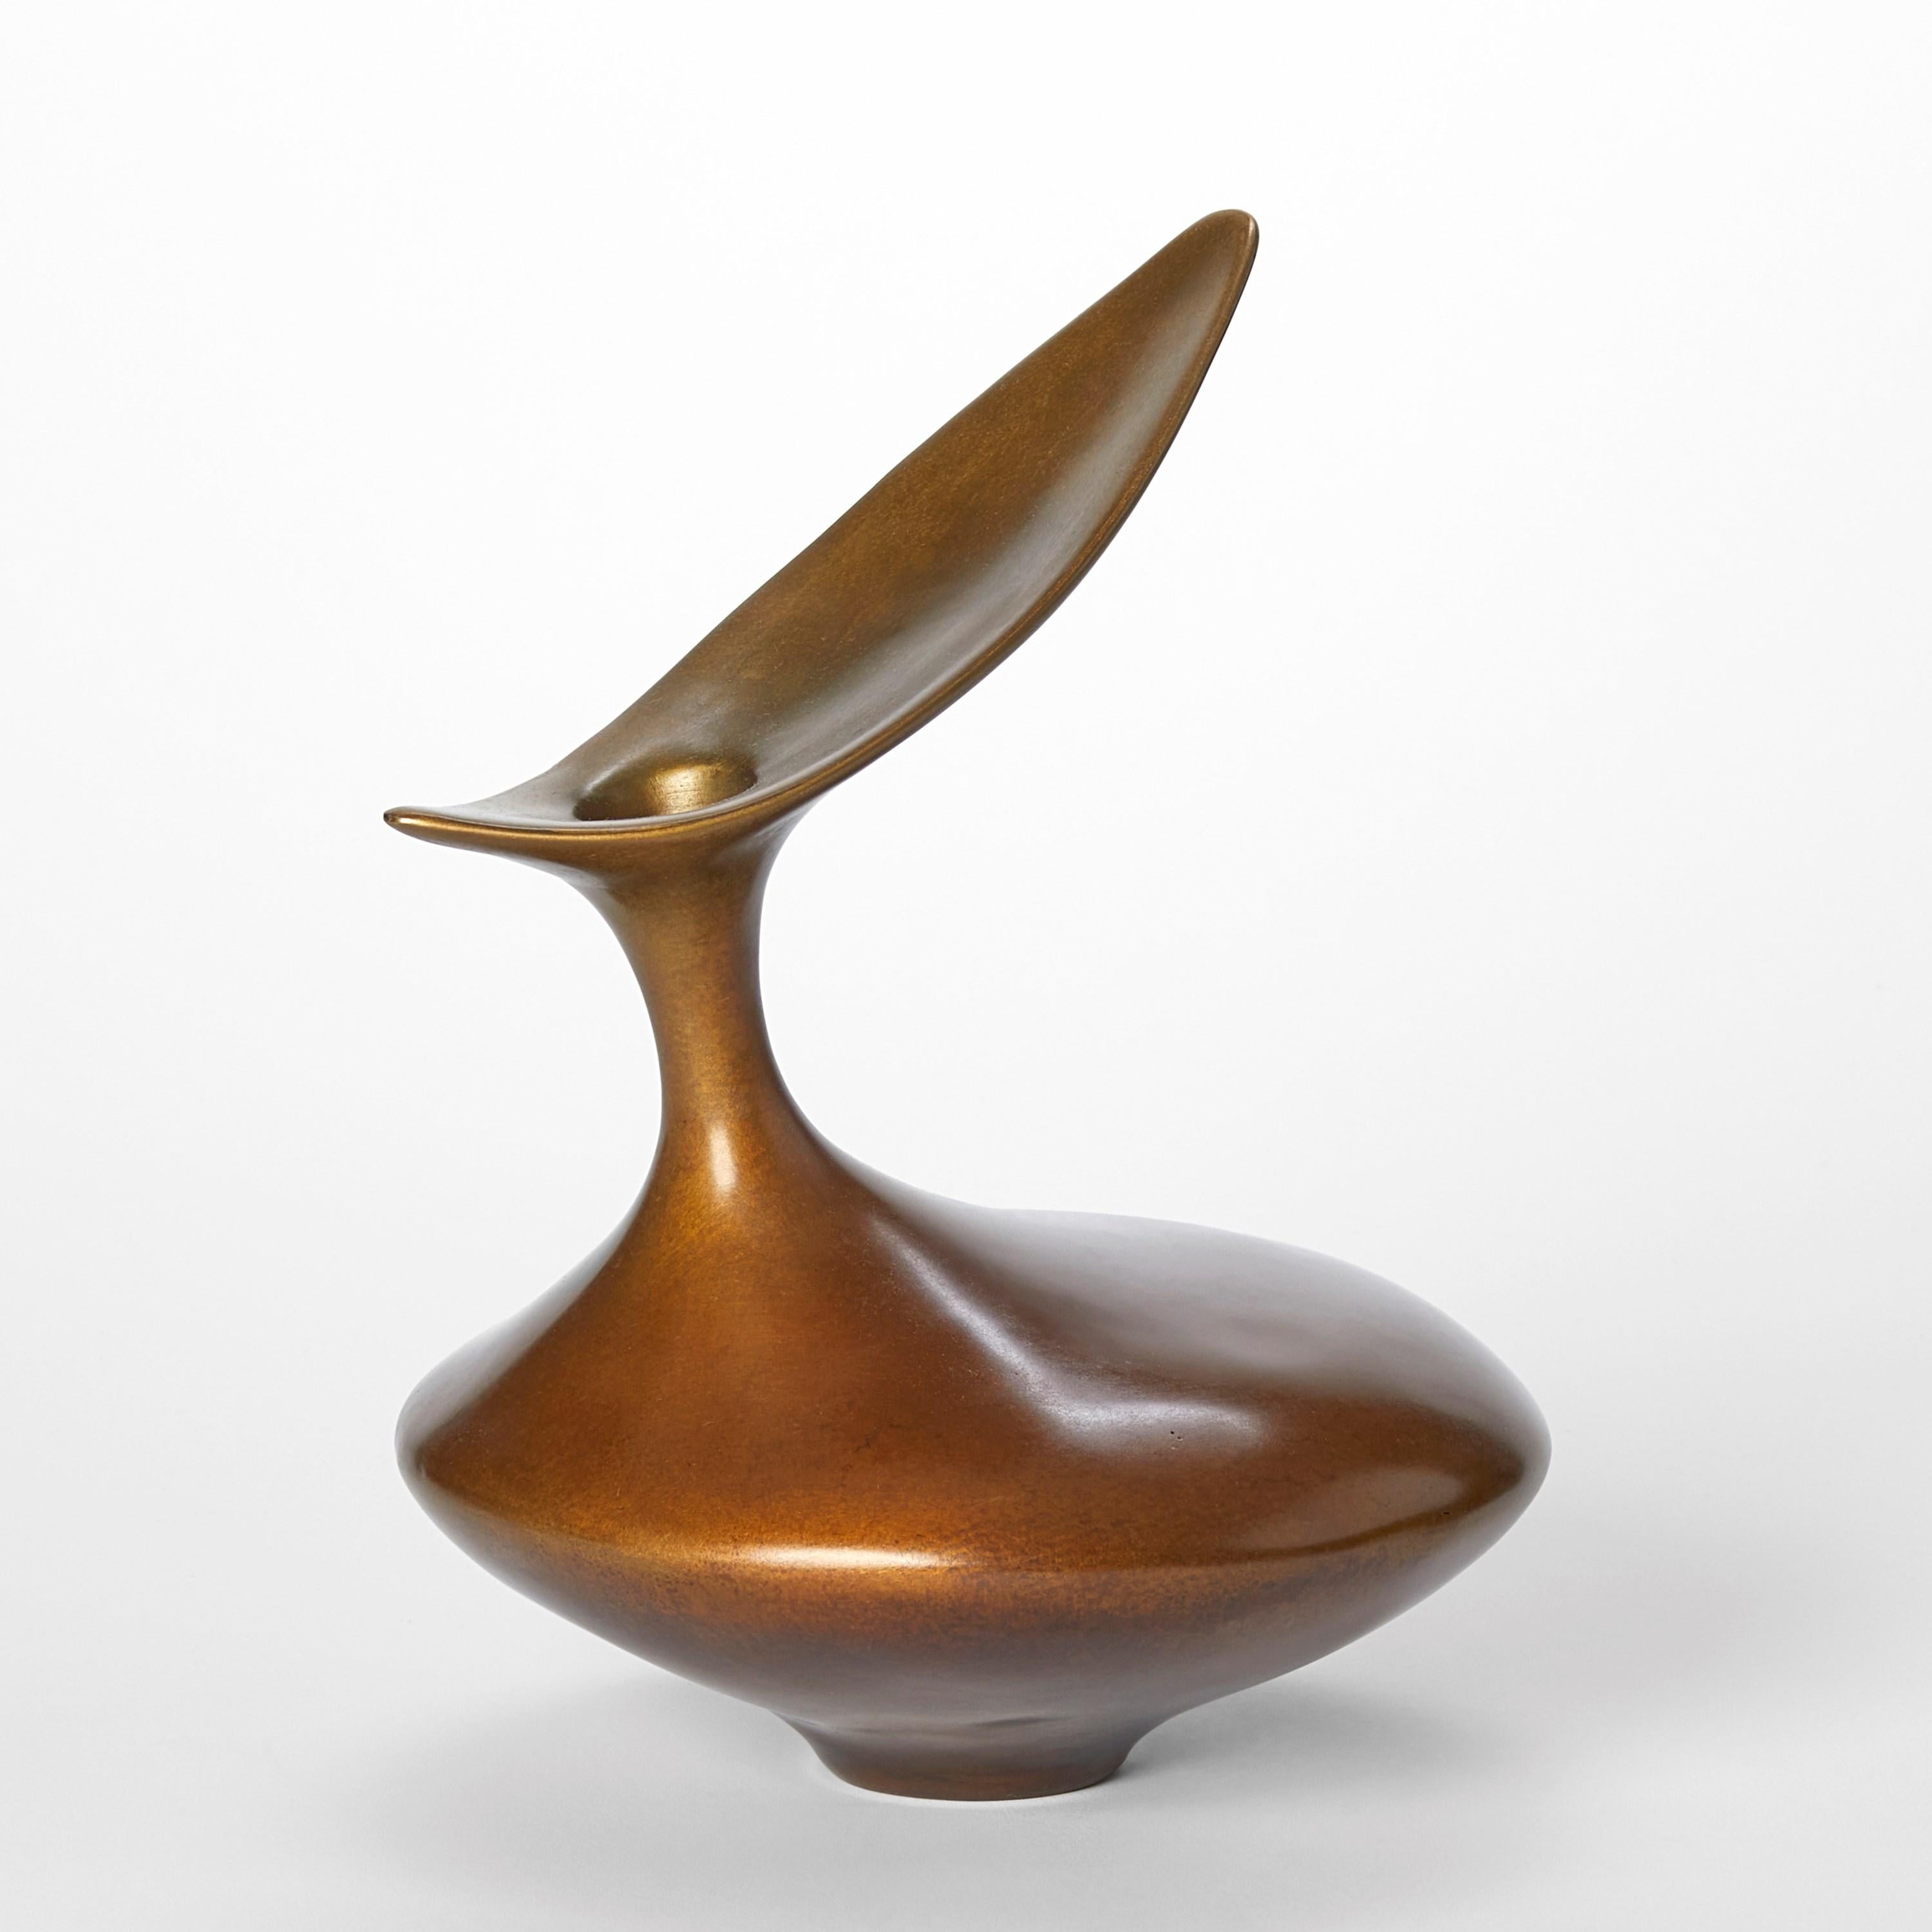 ‘Bird Form’ is a limited edition (3 + 2AP) bronze sculpture by the British artist, Vivienne Foley.

Vivienne Foley’s bronze sculptures are a recent development of her best-known works in porcelain, a medium she has worked in for over 50 years. By